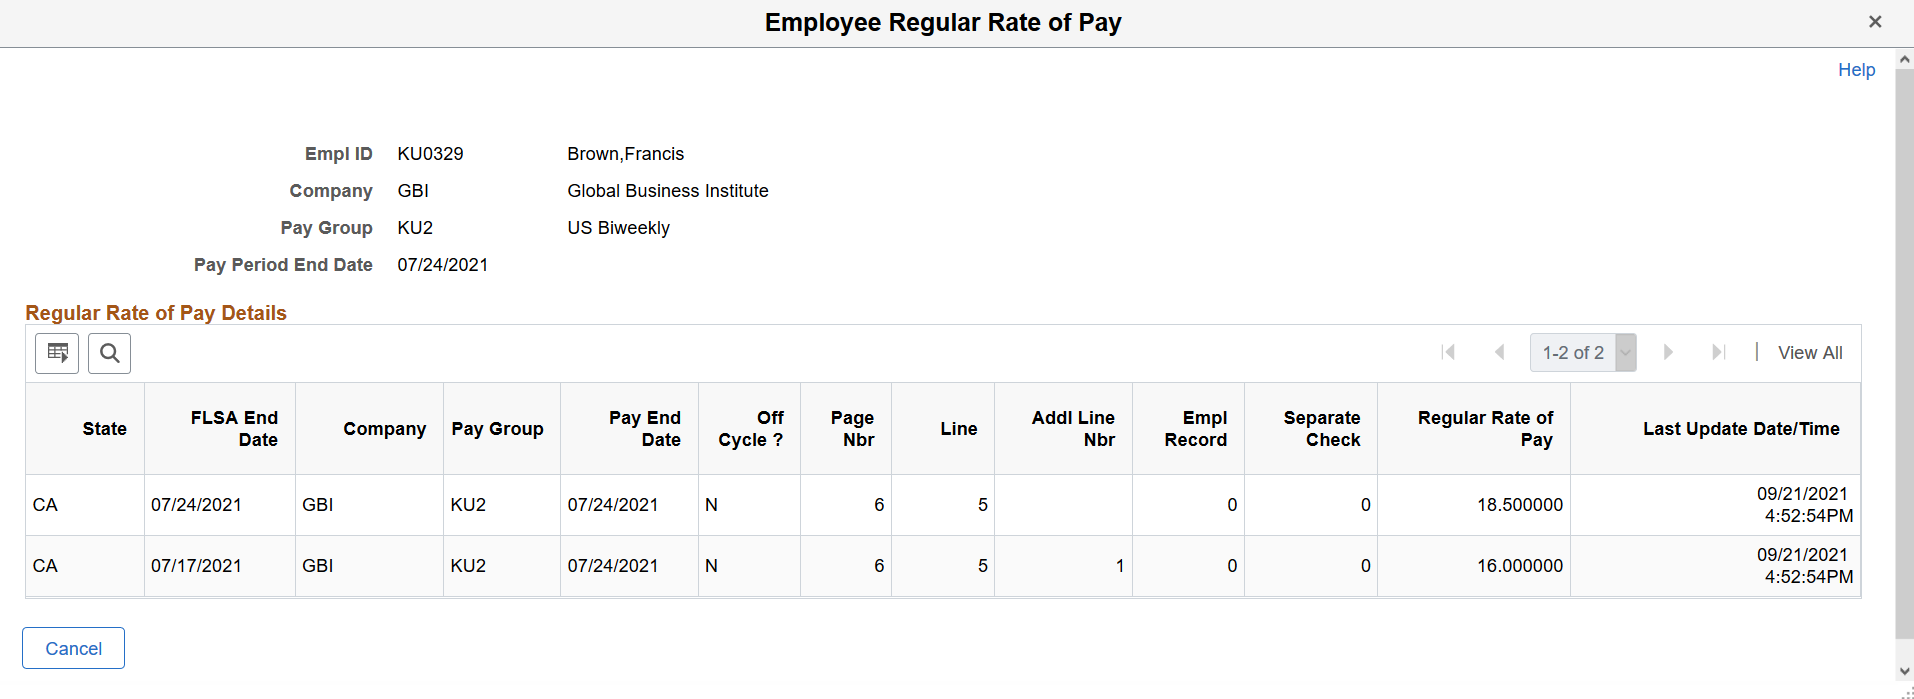 Calculated regular rate of pay for example 4